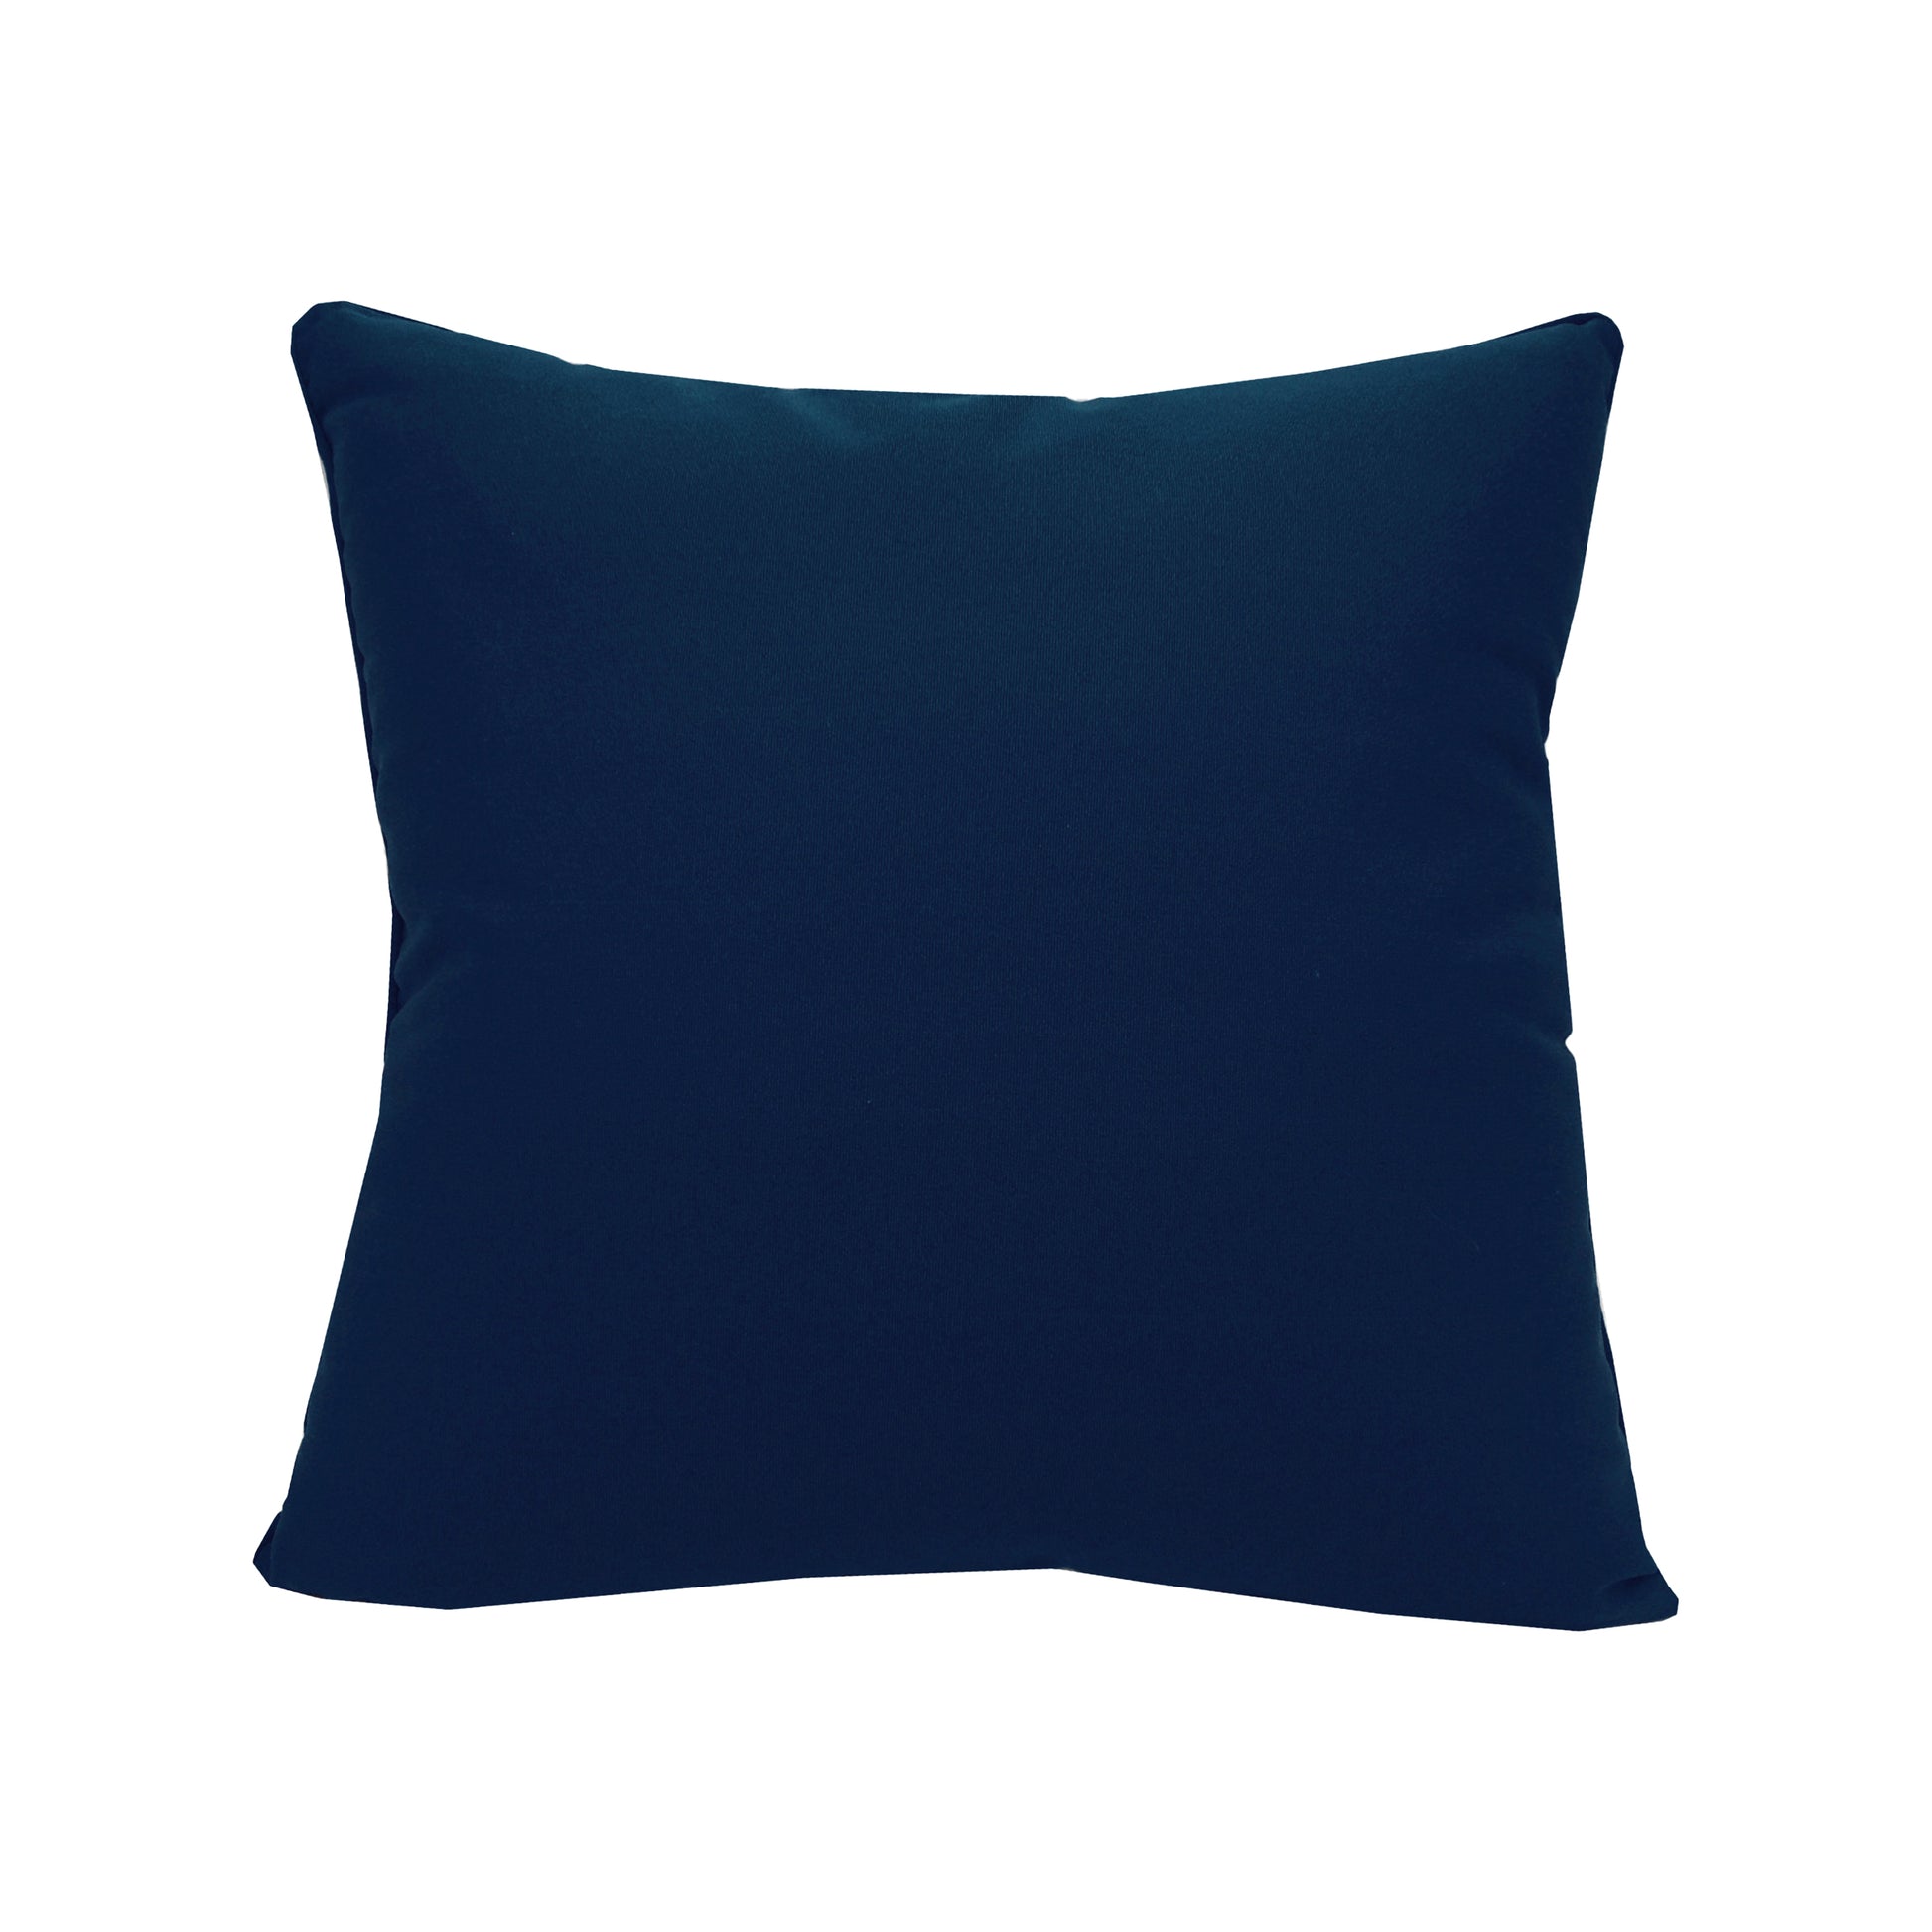 Back of the World Is Your Oyster Indoor Outdoor pillow